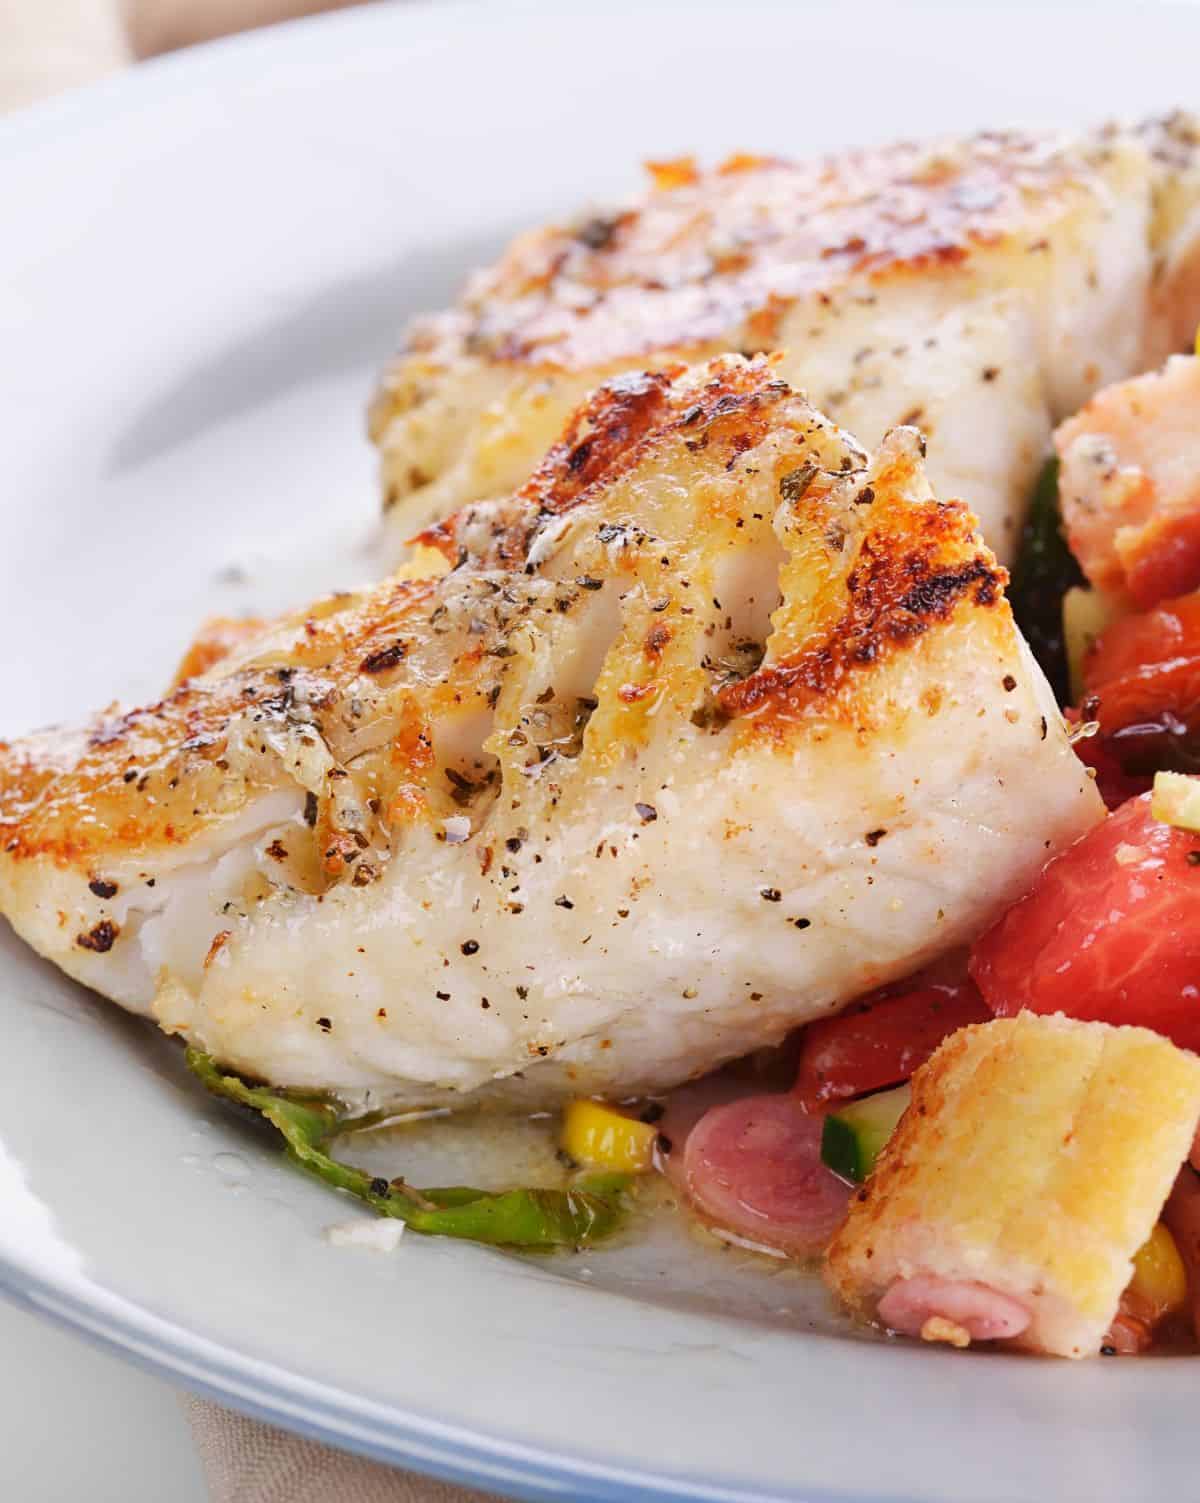 A close-up photo of seasoned and grilled mahi mahi on a white plate with vegetables.